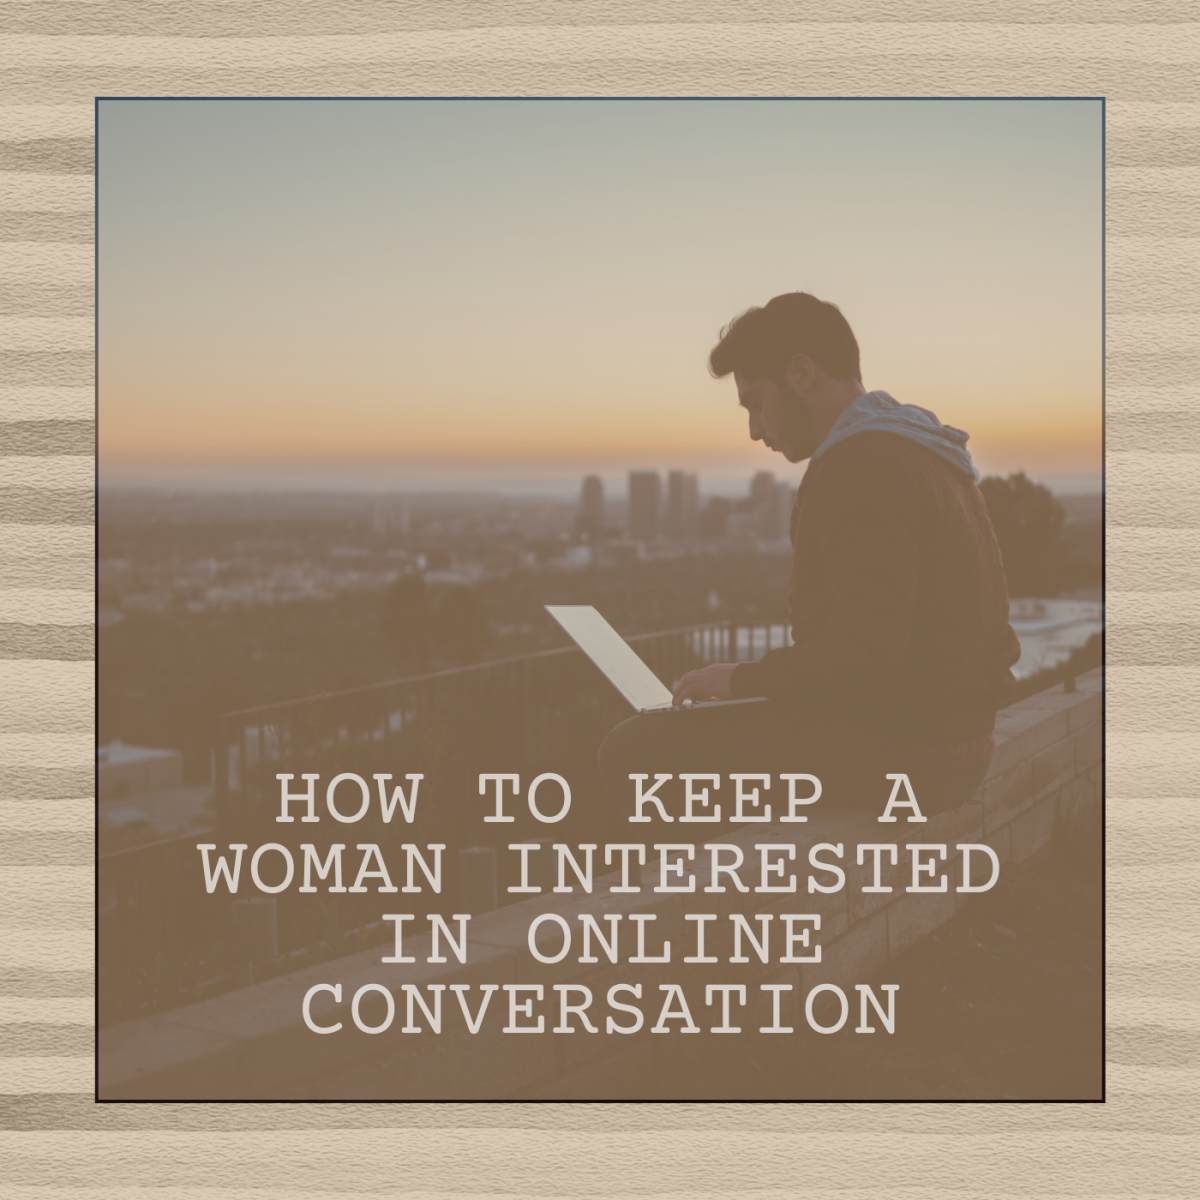 how-to-keep-a-woman-interested-in-conversation